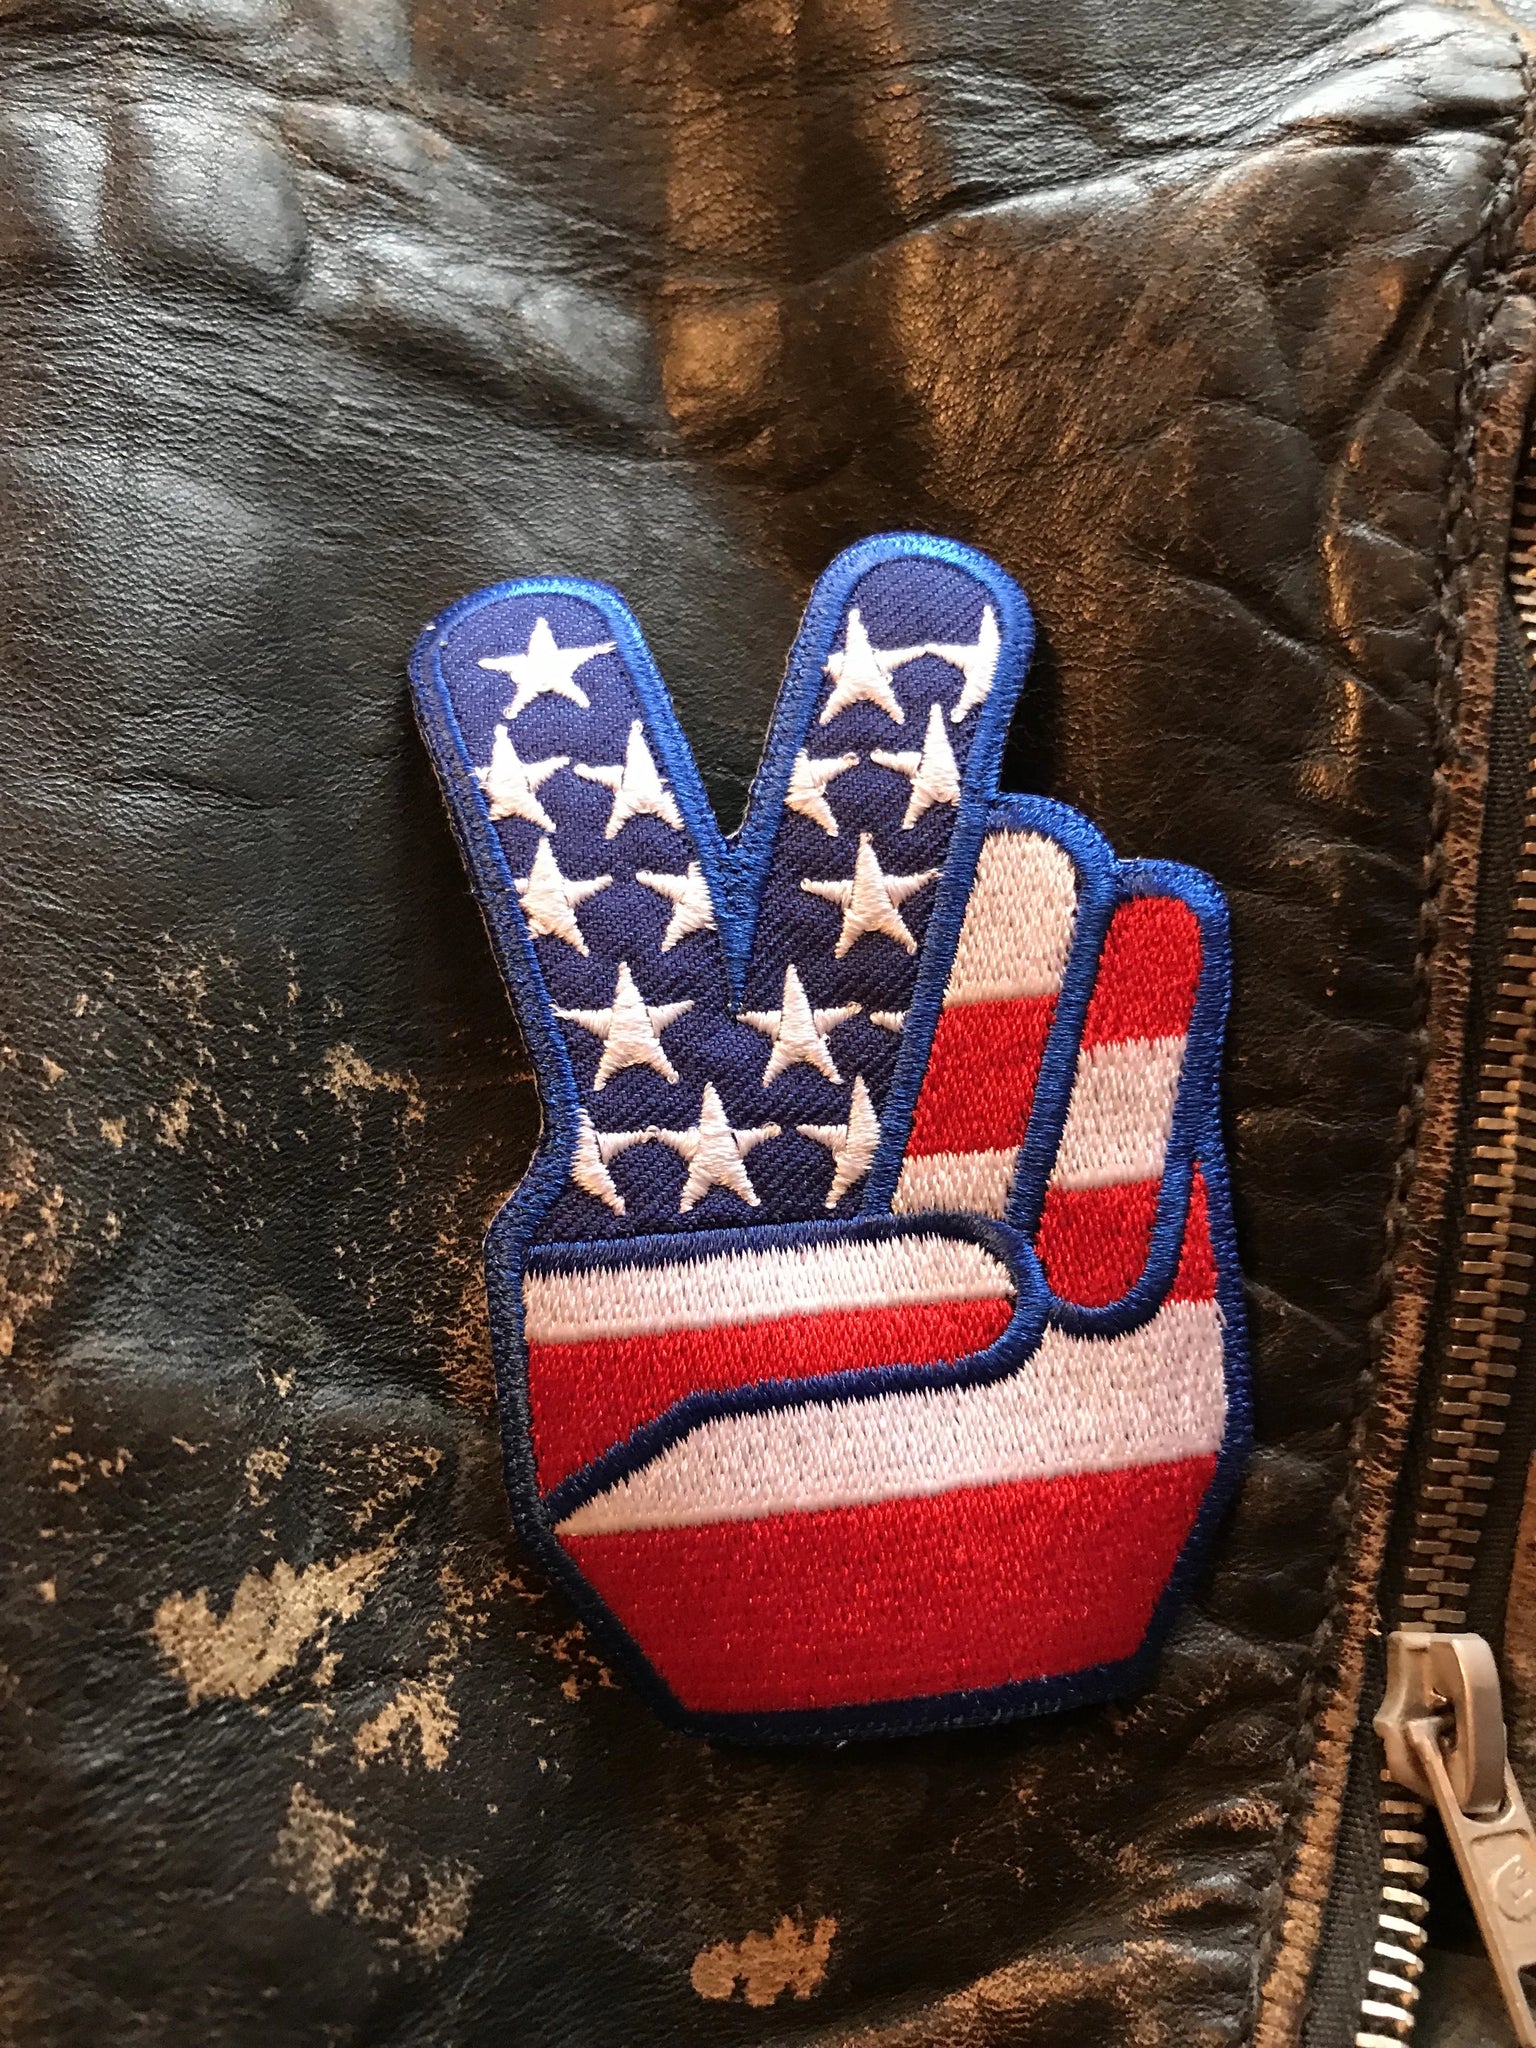 Vintage Chopper Motorcycle Patch! Peace Flag Hand!